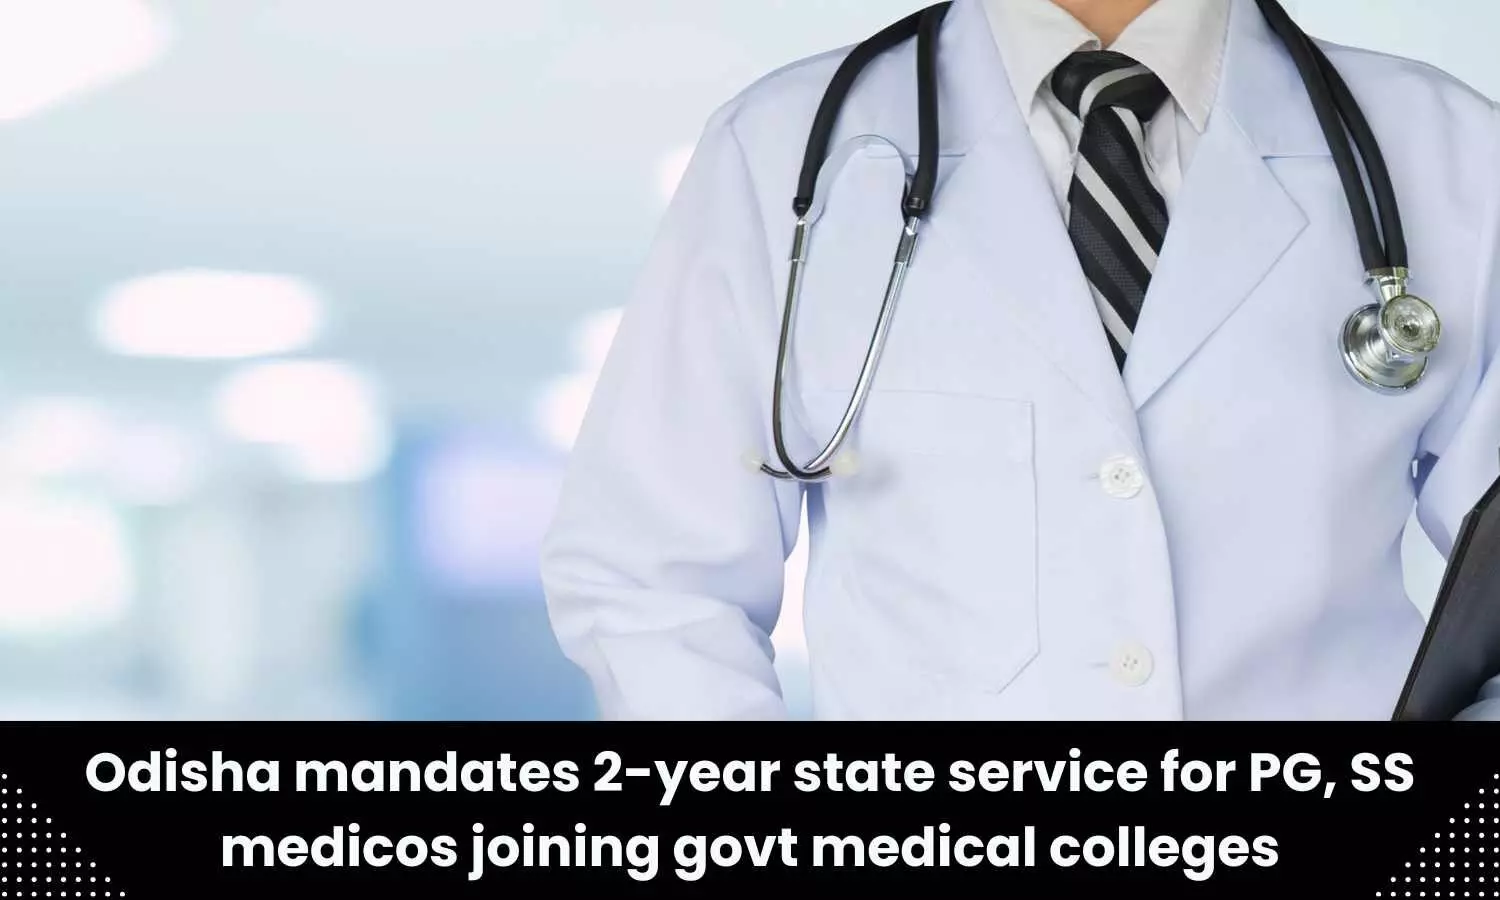 Odisha introduces two-year bond service policy for candidates joining PG medical courses in govt medical colleges